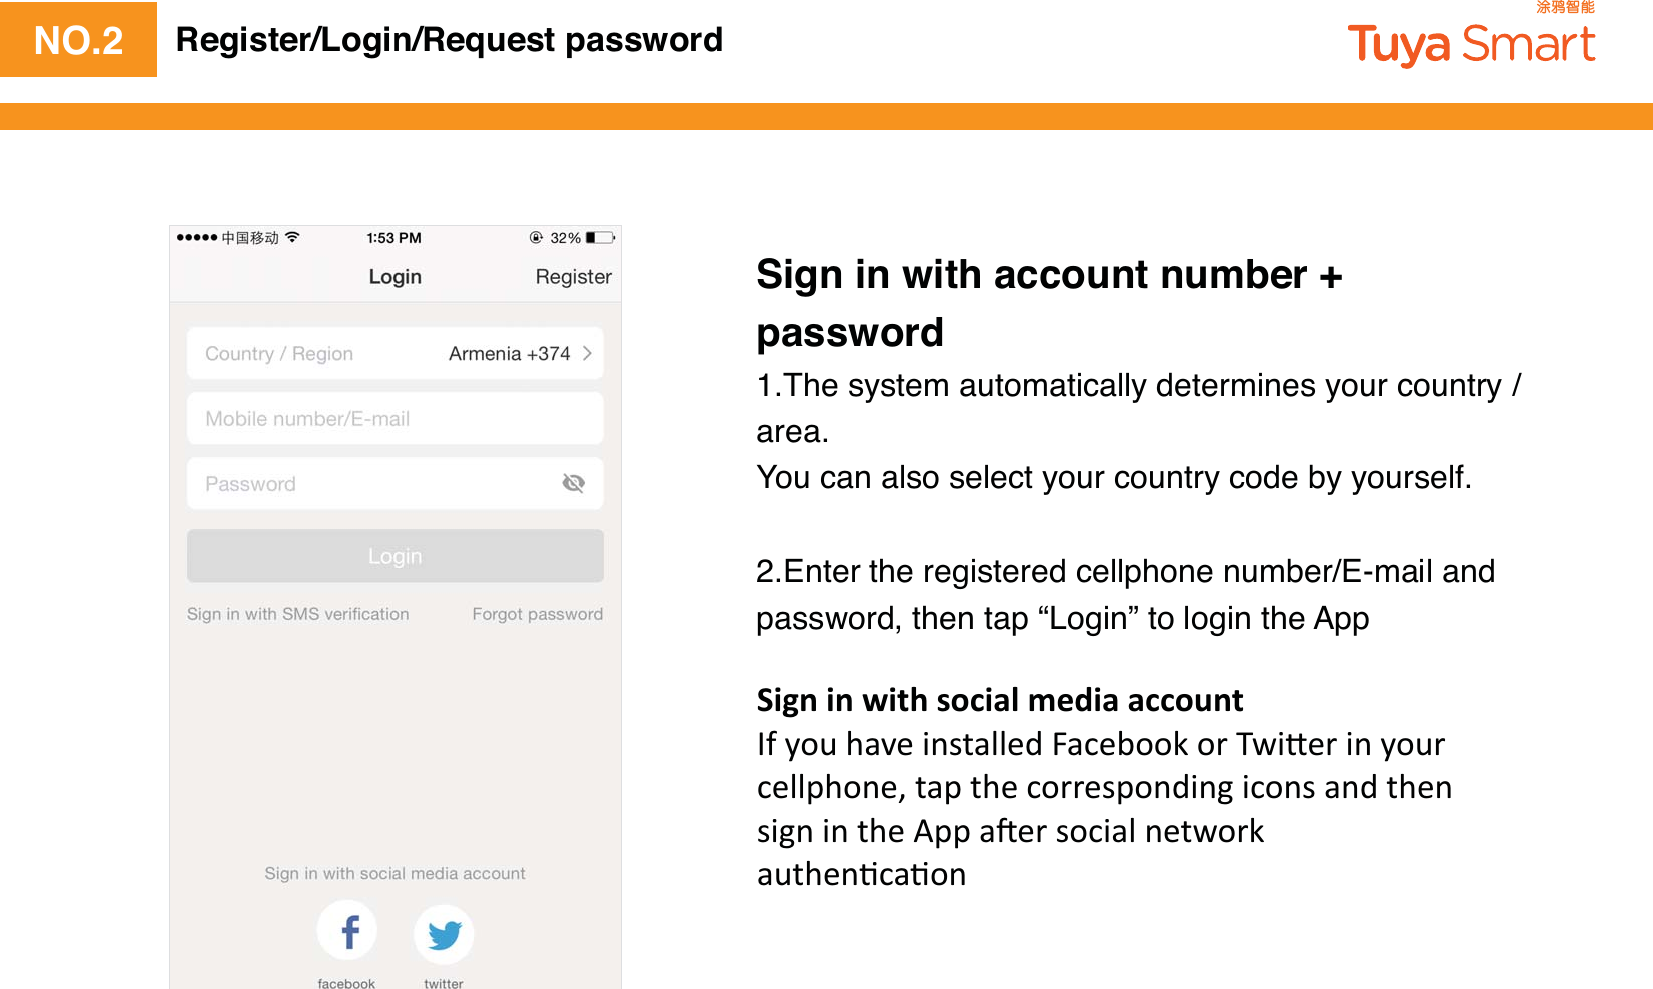 NO.2Sign in with account number + password1.The system automatically determines your country / area.You can also select your country code by yourself.2.Enter the registered cellphone number/E-mail and password, then tap “Login” to login the AppRegister/Login/Request password